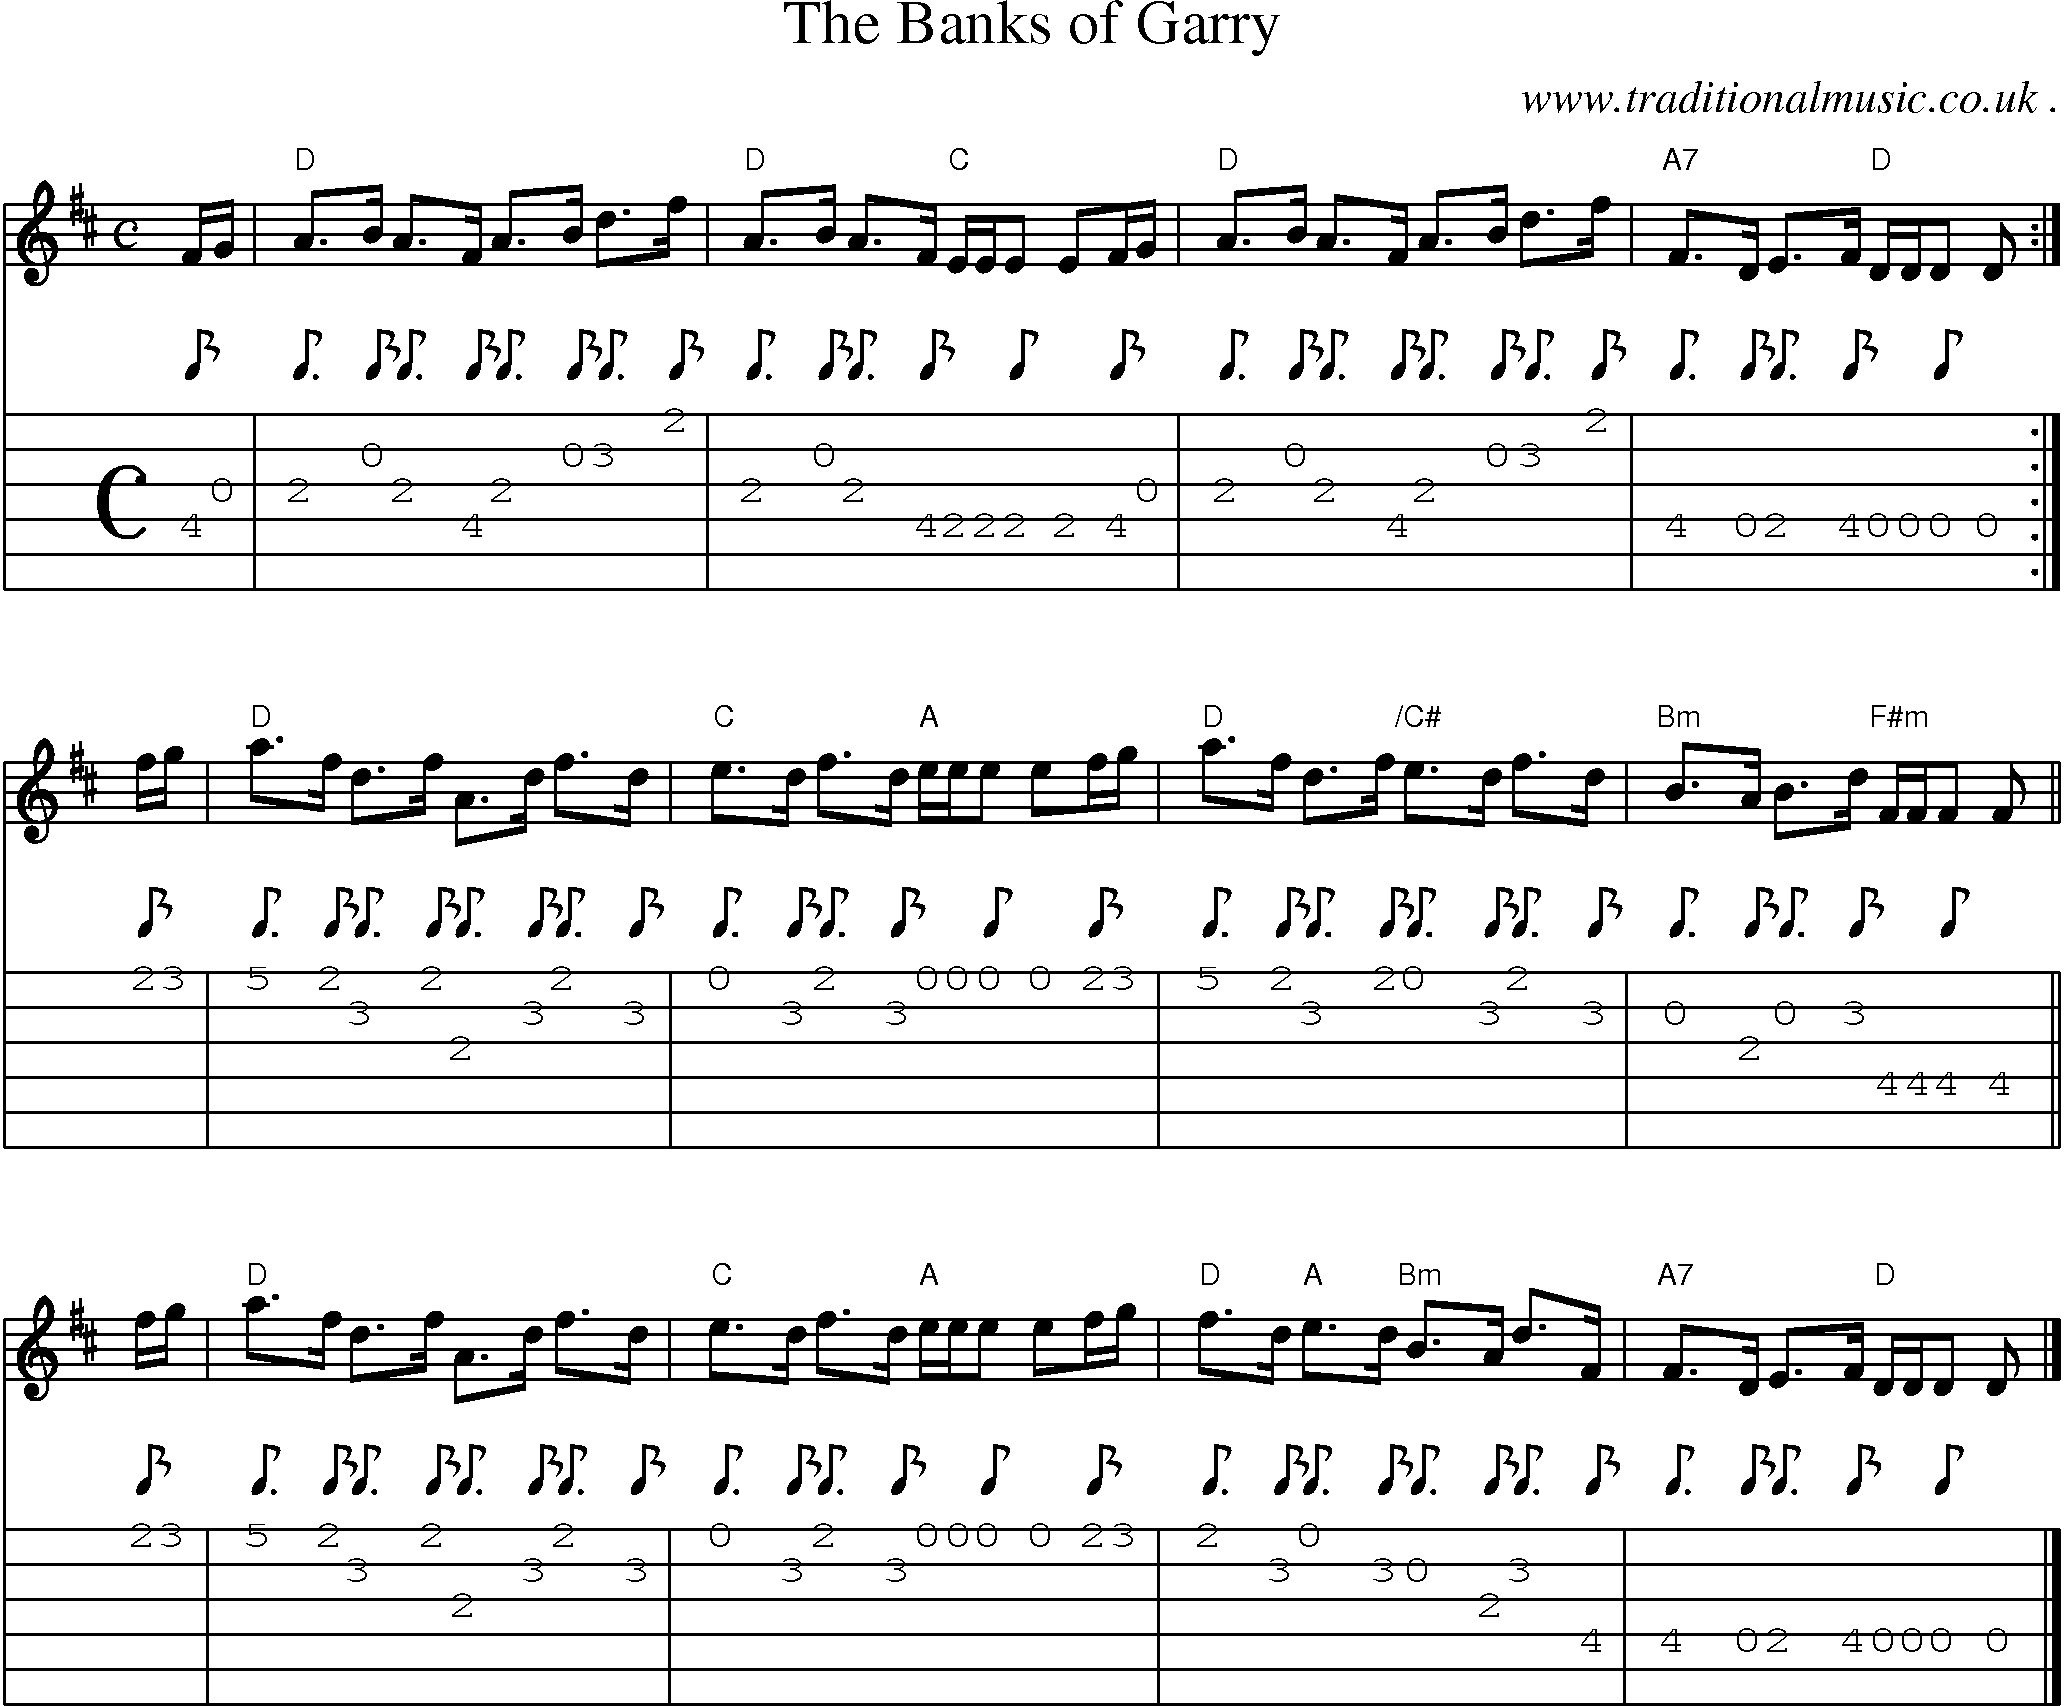 Sheet-music  score, Chords and Guitar Tabs for The Banks Of Garry